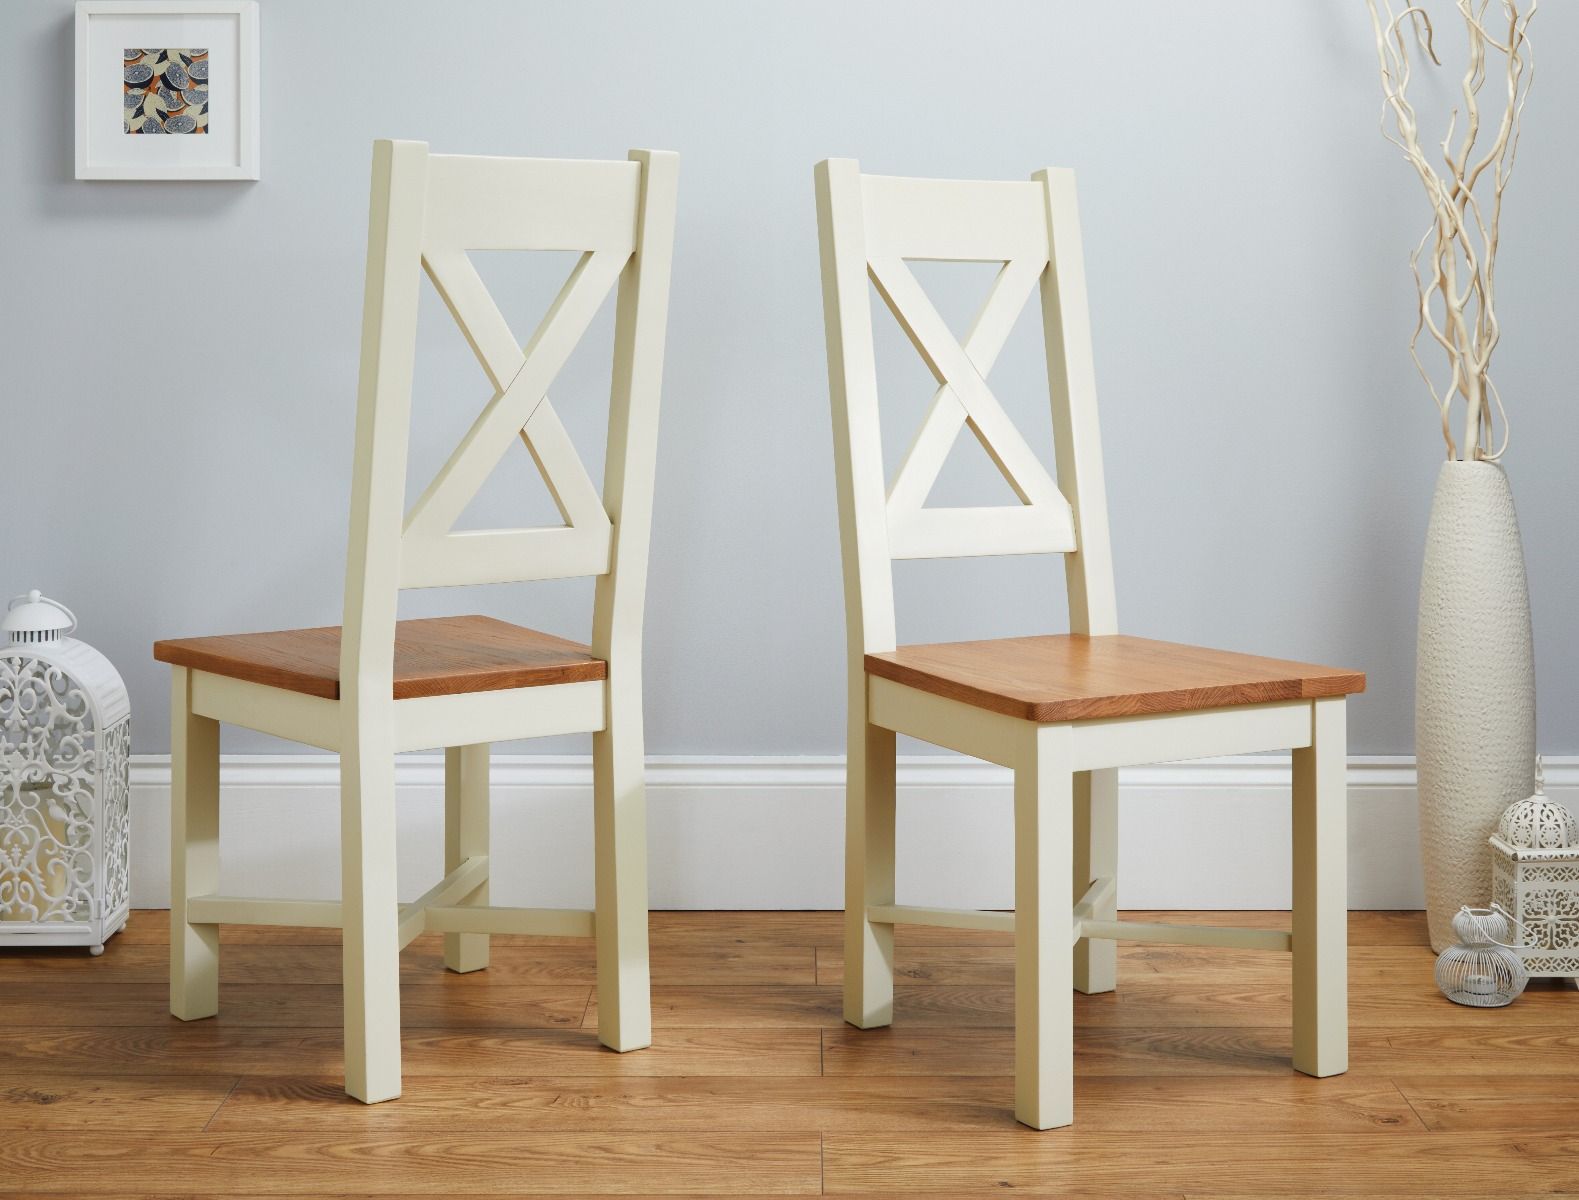 Grasmere Cross Back Cream Painted Chair With Solid Oak Seat - 10% OFF WINTER SALE